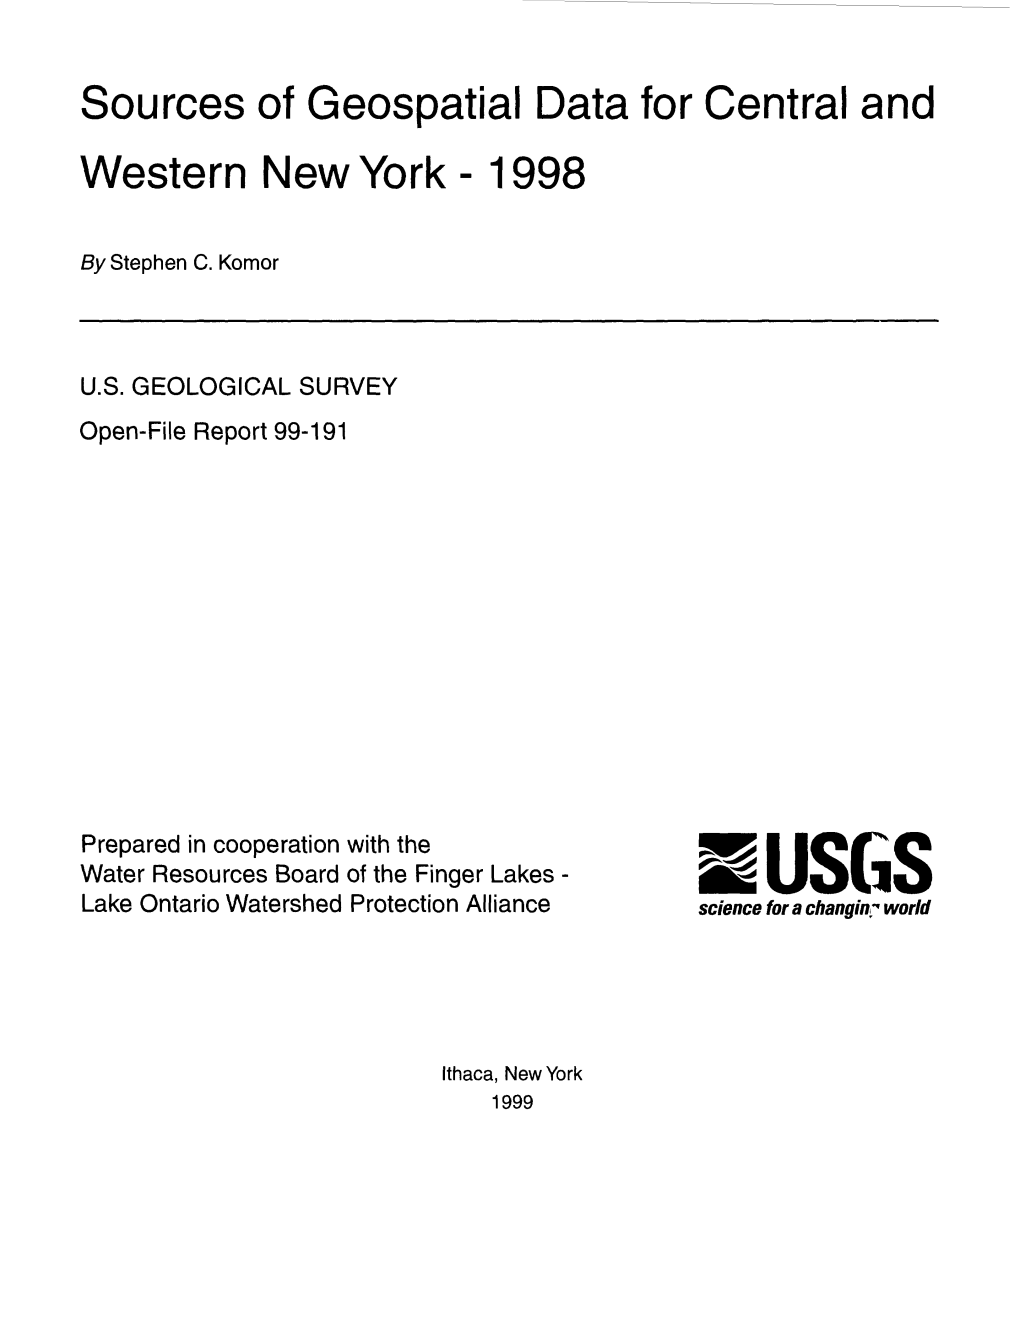 Sources of Geospatial Data for Central and Western New York -1998